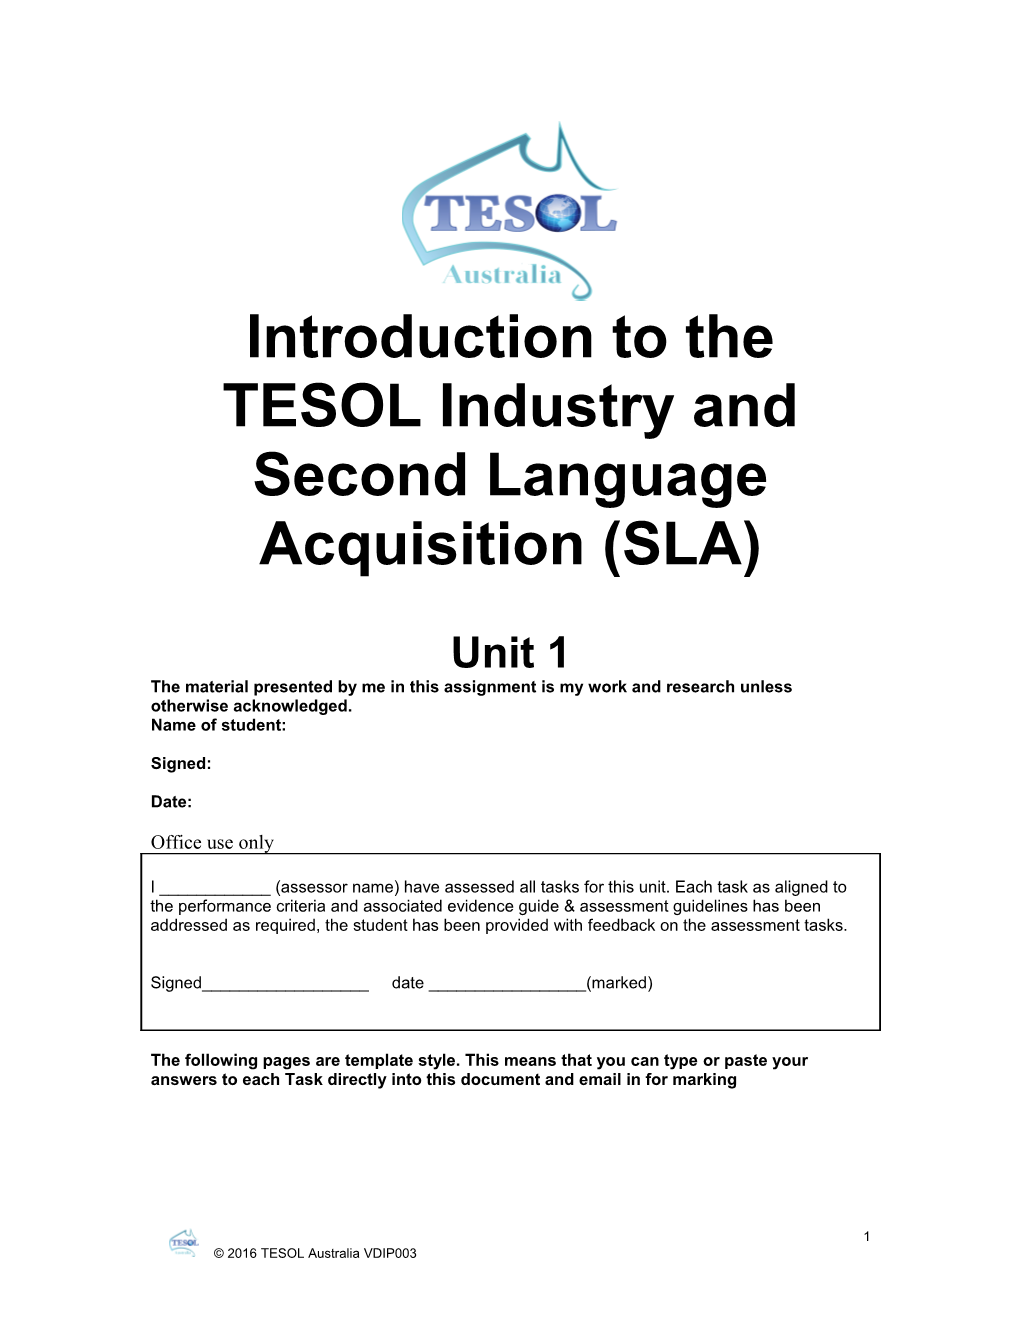 Introduction to the TESOL Industry and Second Language Acquisition (SLA)